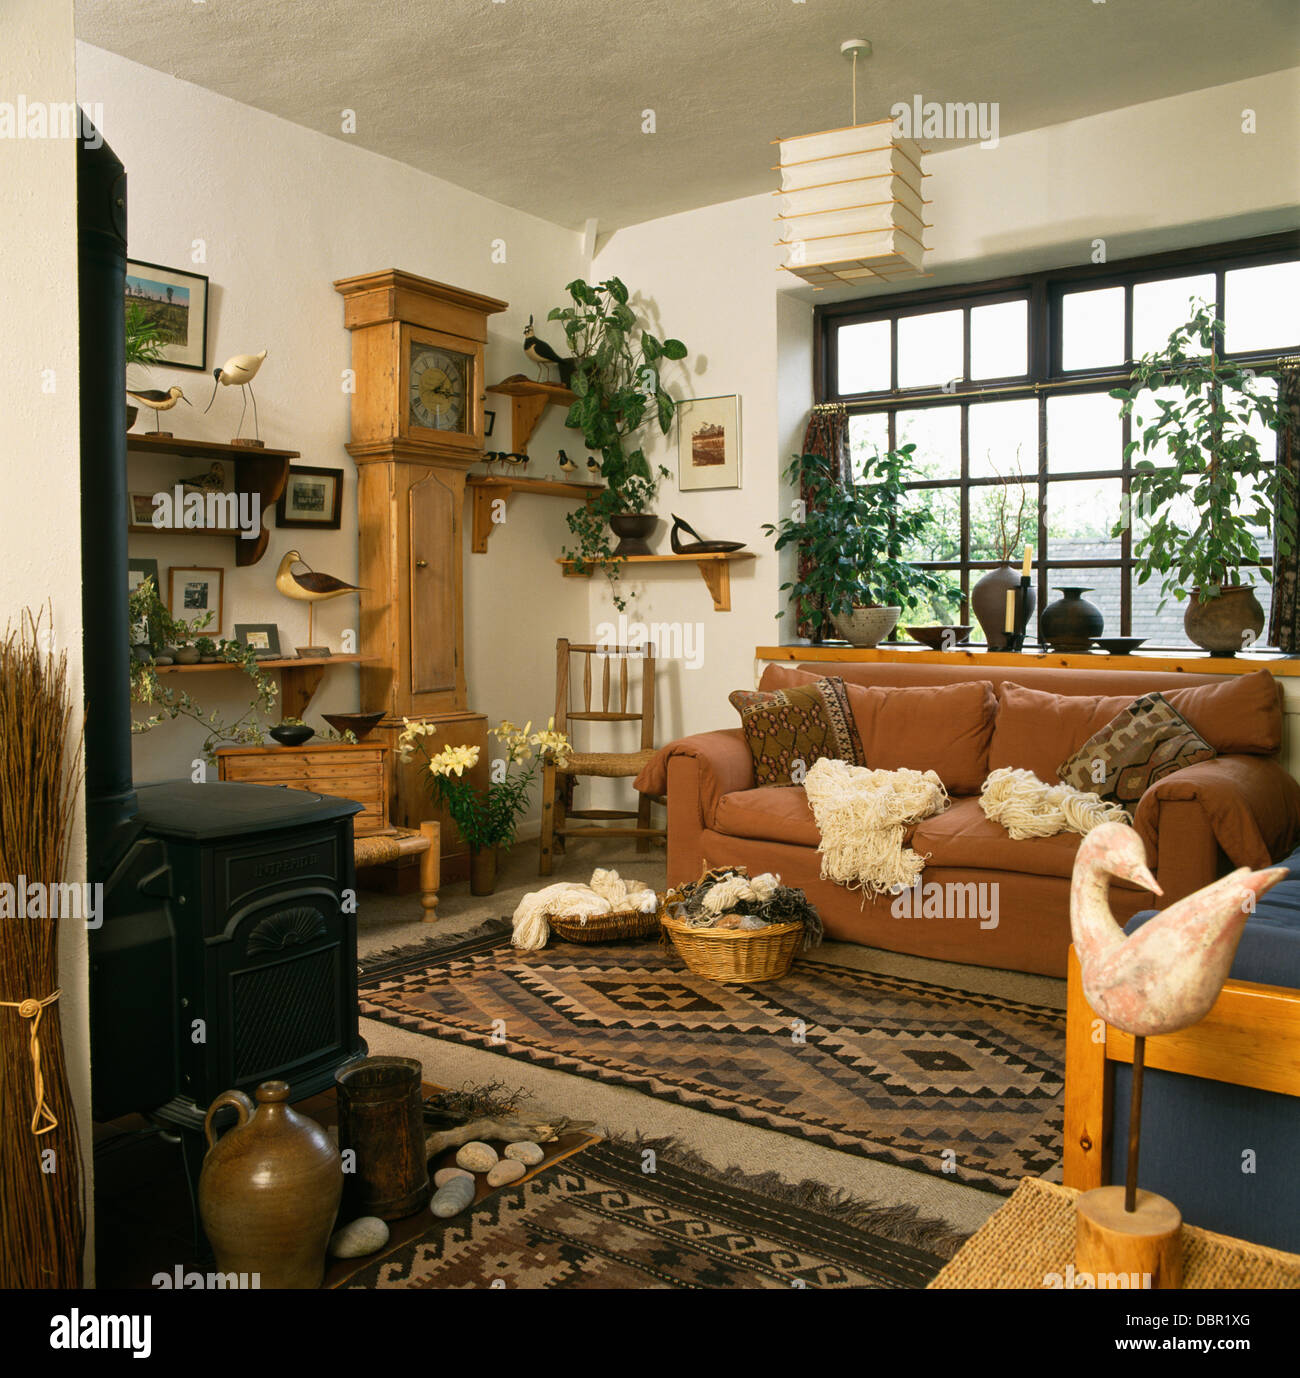 Baskets of wool and patterned rug in economy-style living room with pine long case clock and wood-burning stove Stock Photo